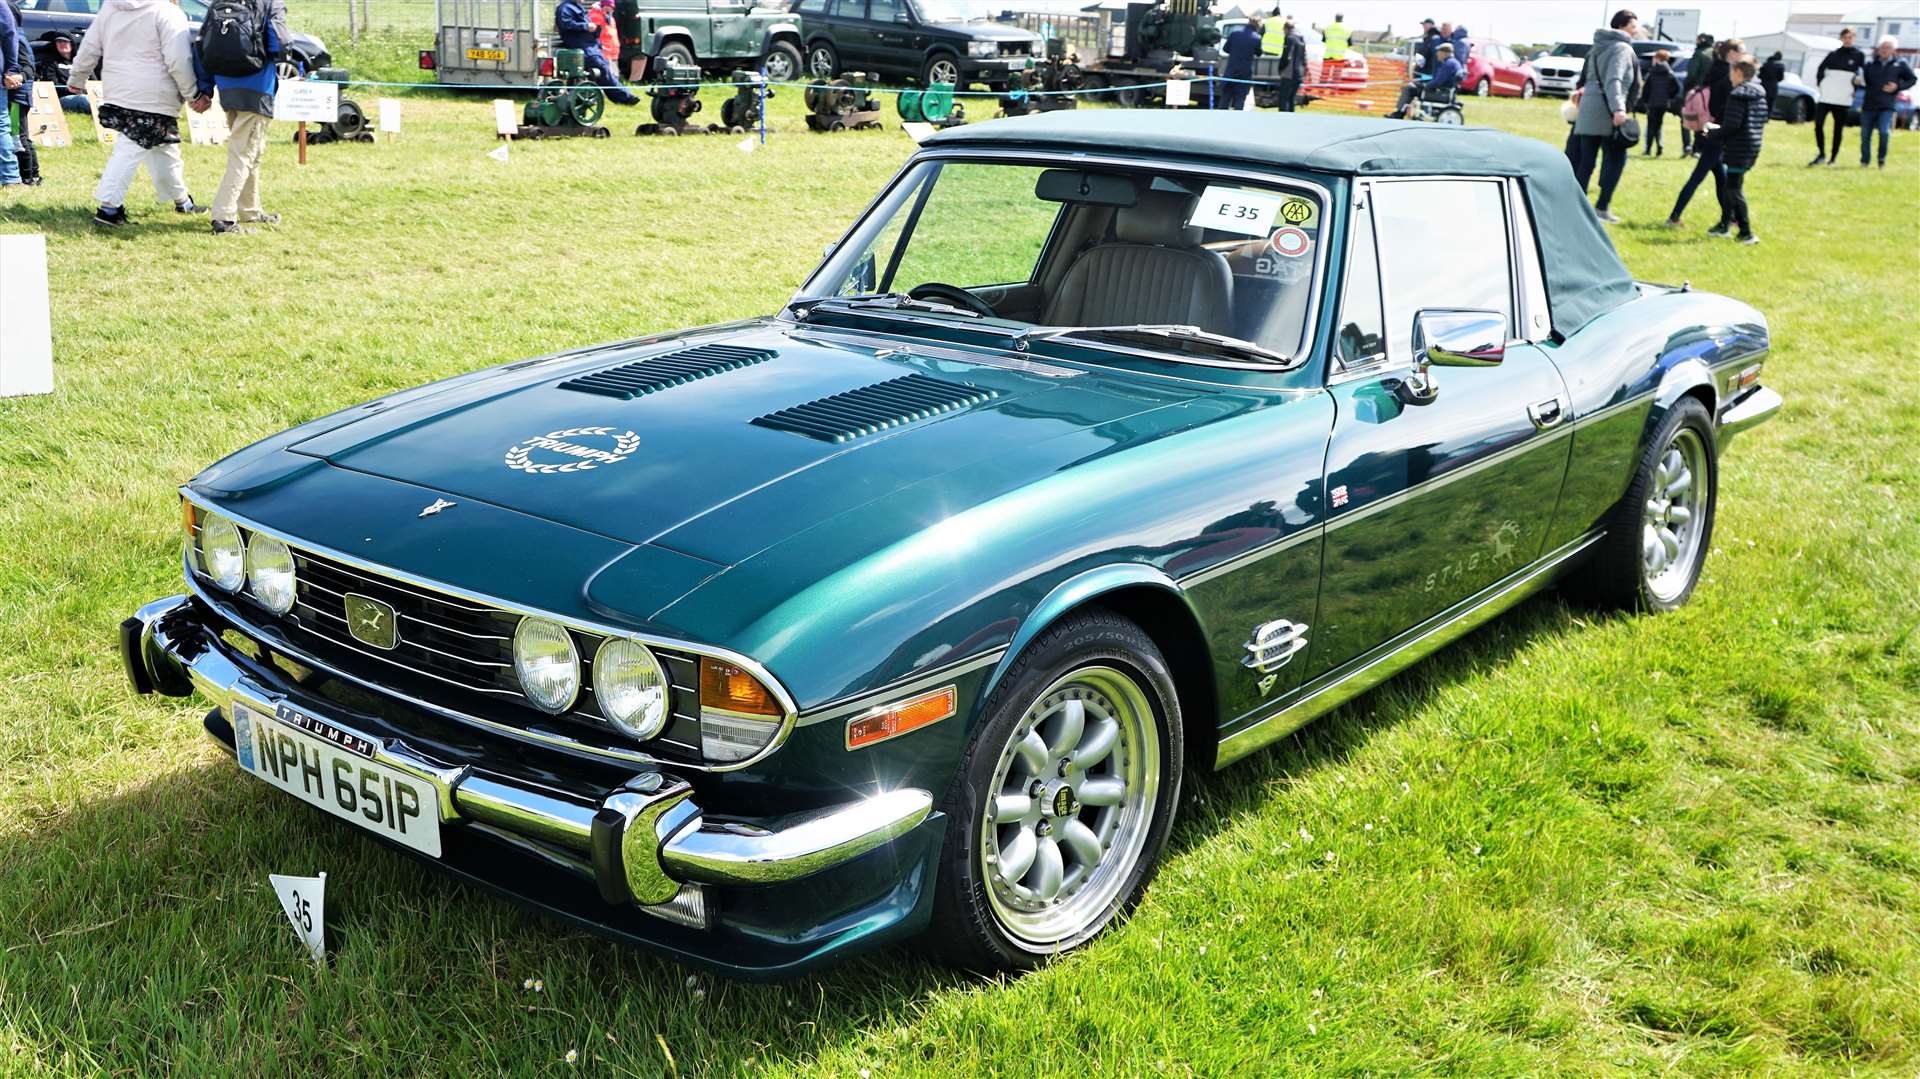 1976 Triumph Stag owned by Les Bremner from Halkirk. Picture: DGS